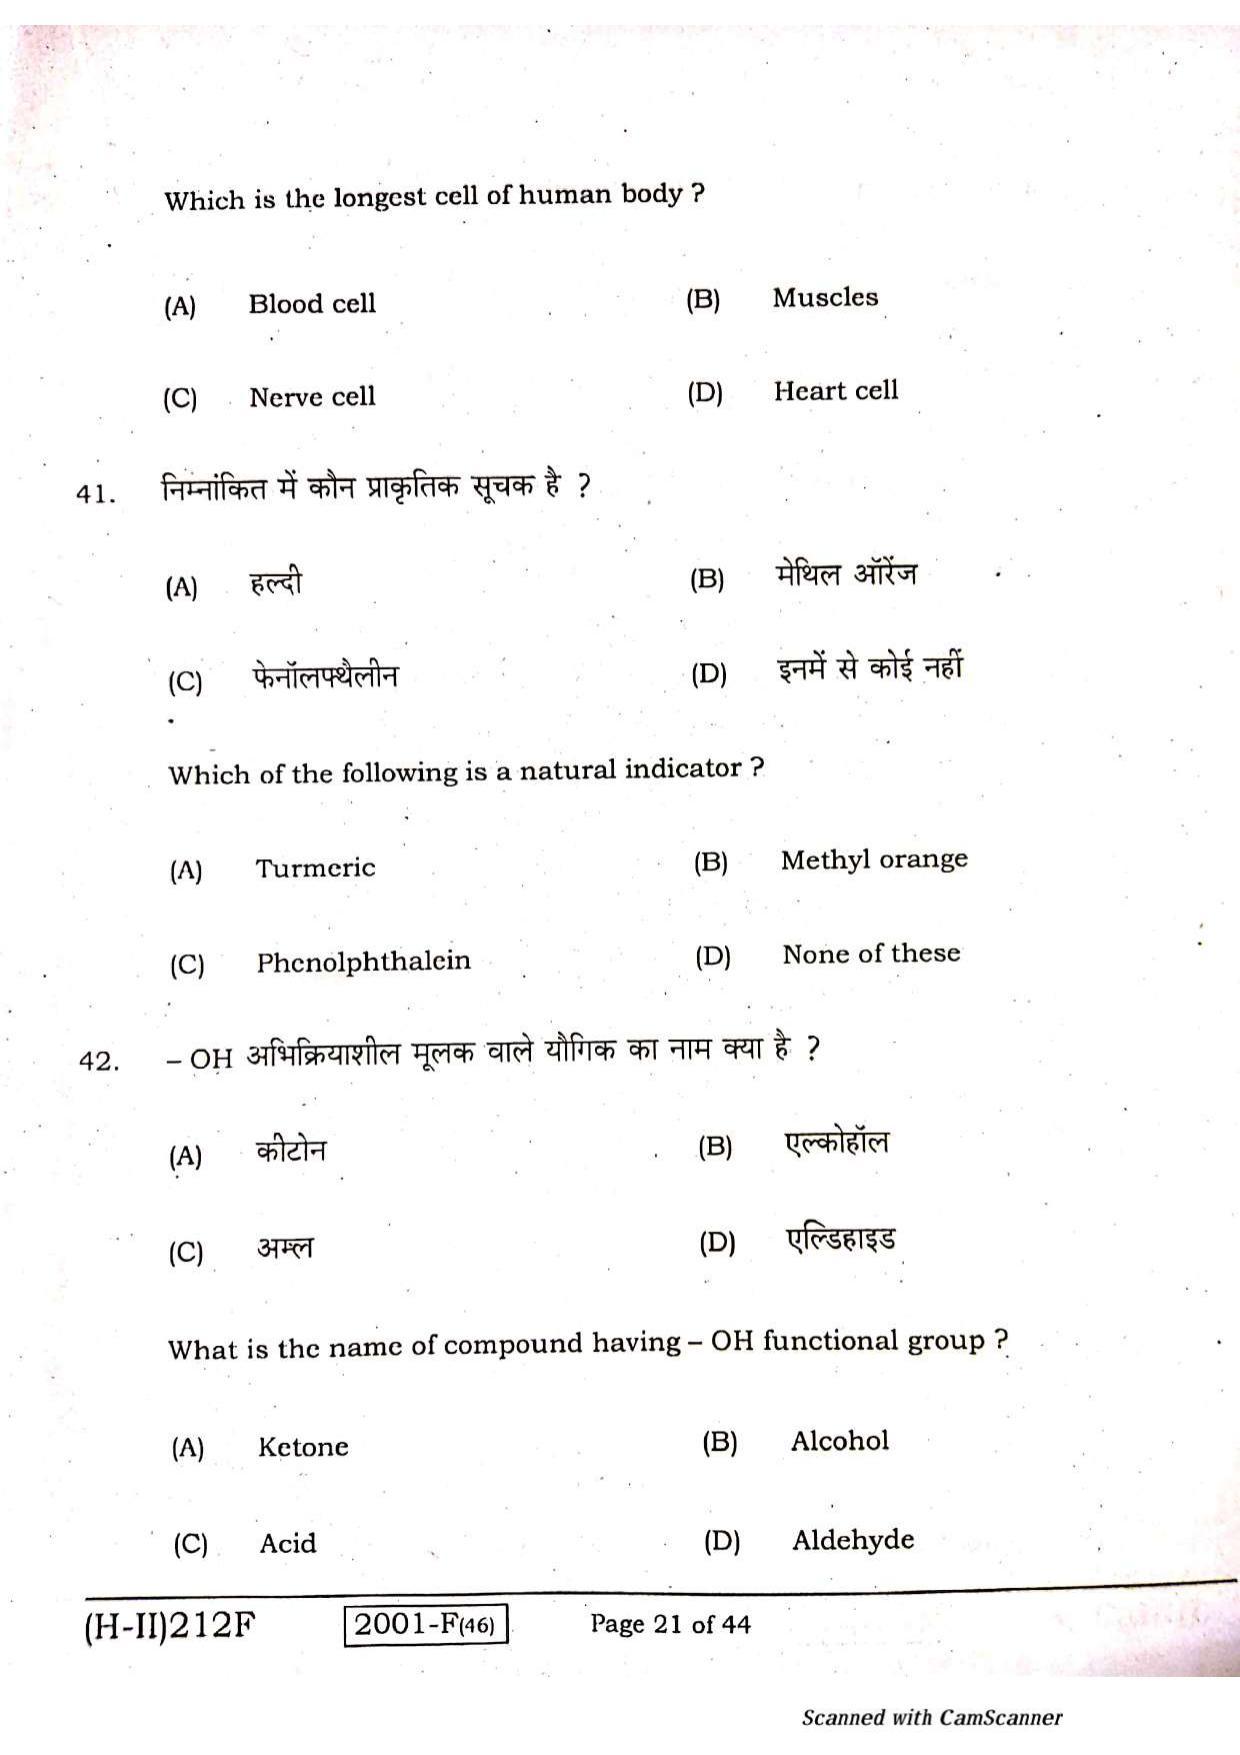 Bihar Board Class 10 Science 2021 (2nd Sitting) Question Paper - Page 19